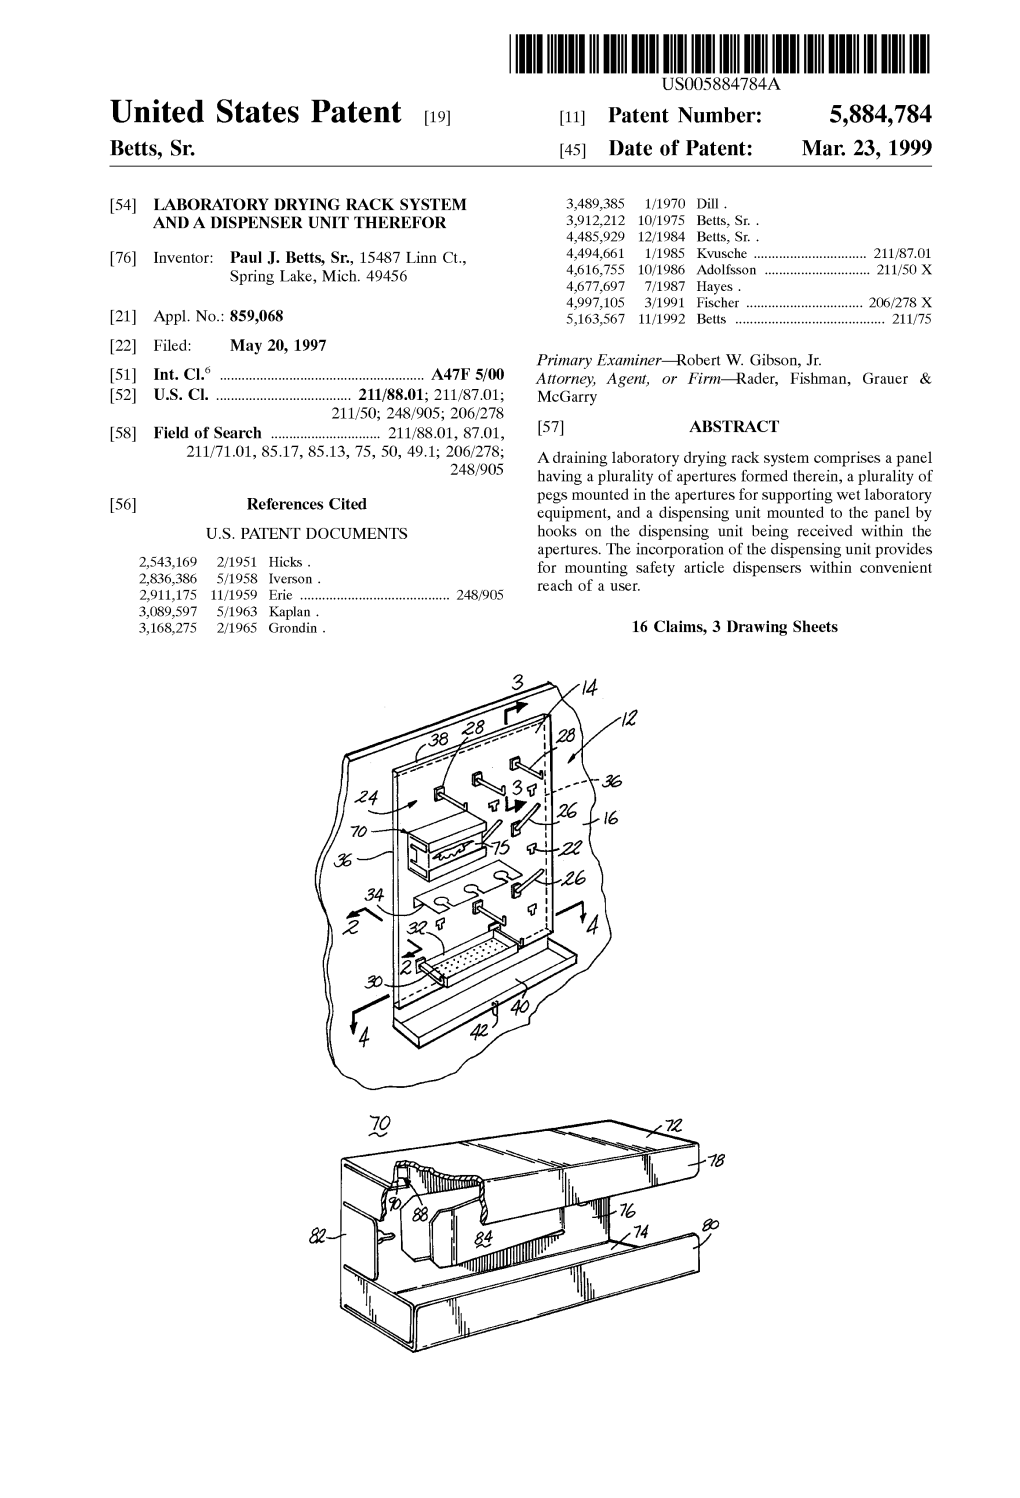 United States Patent (19) 11 Patent Number: 5,884,784 Betts, Sr